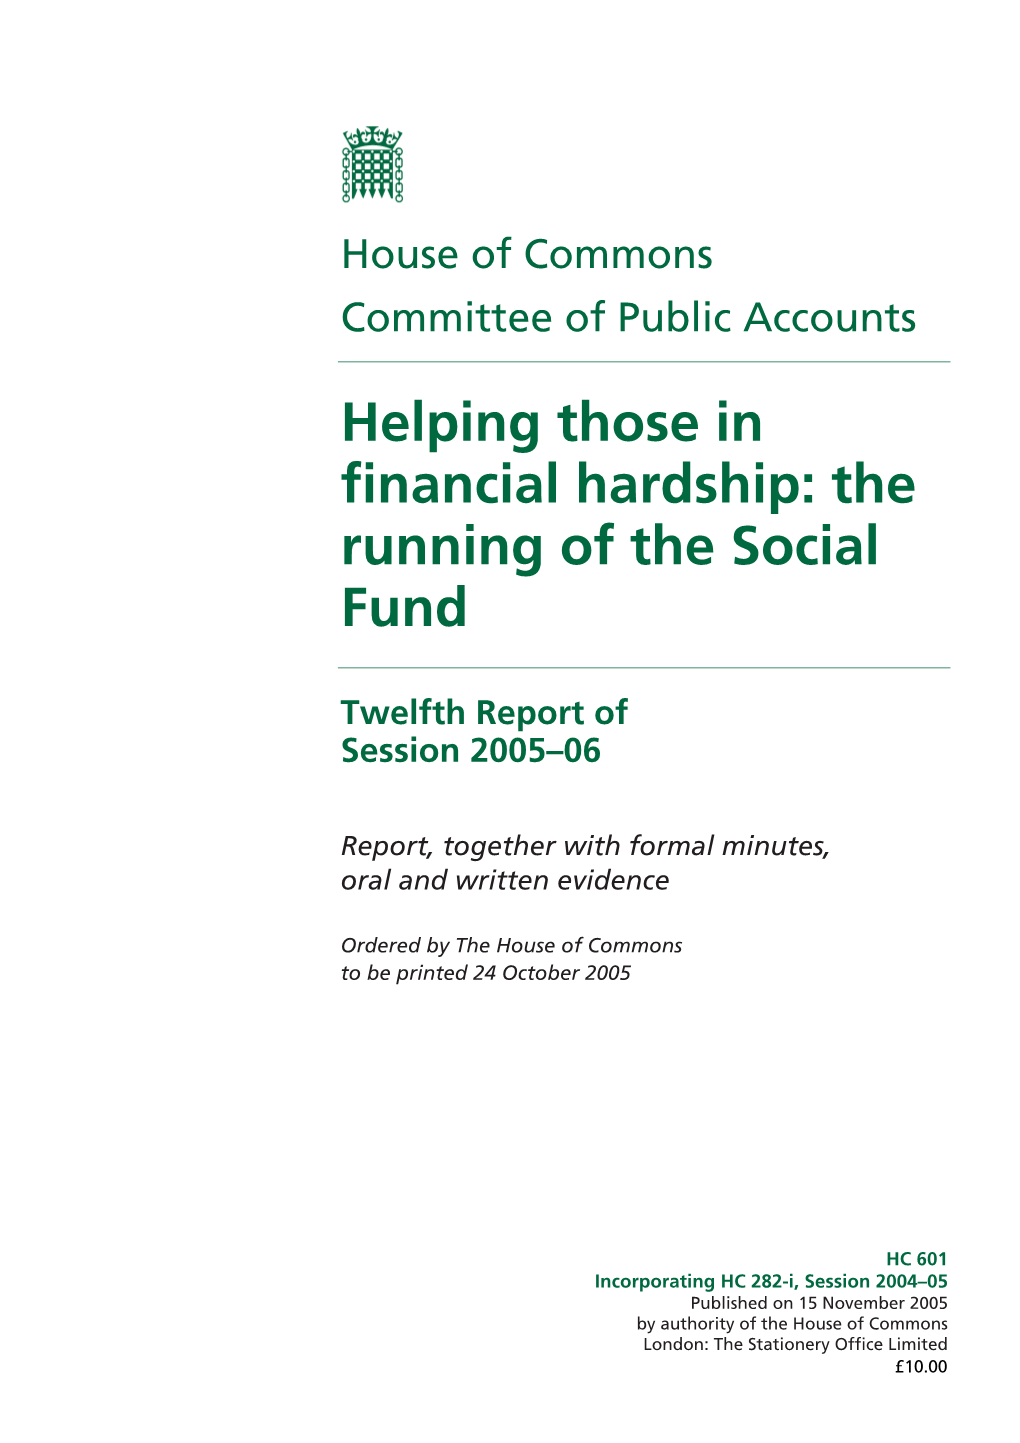 Helping Those in Financial Hardship: the Running of the Social Fund